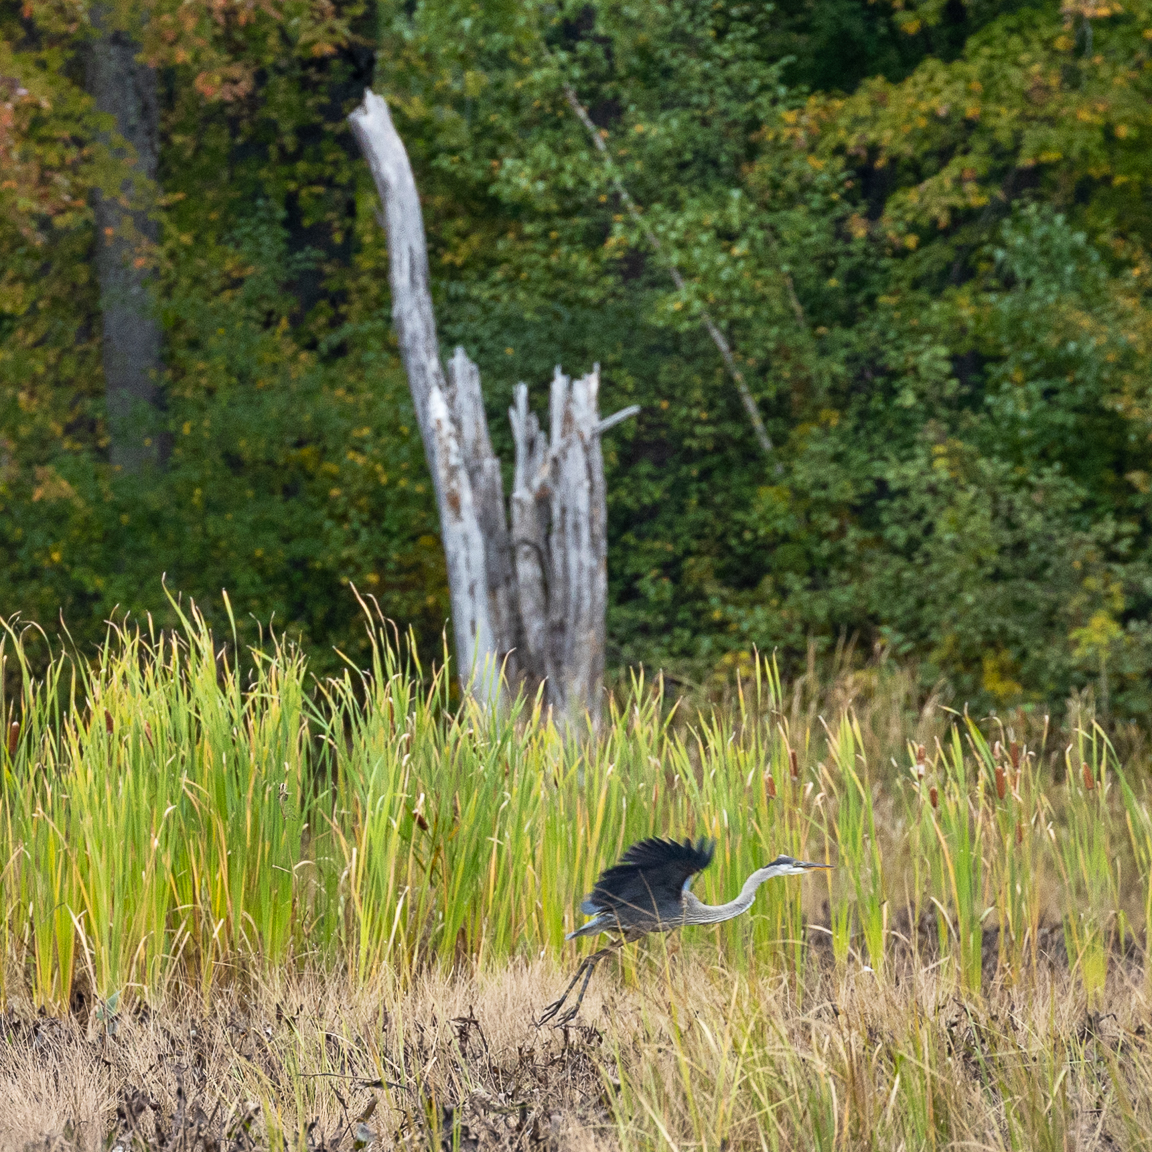 A blue heron as seen from the Duck Trail at Deer Park in Oromocto